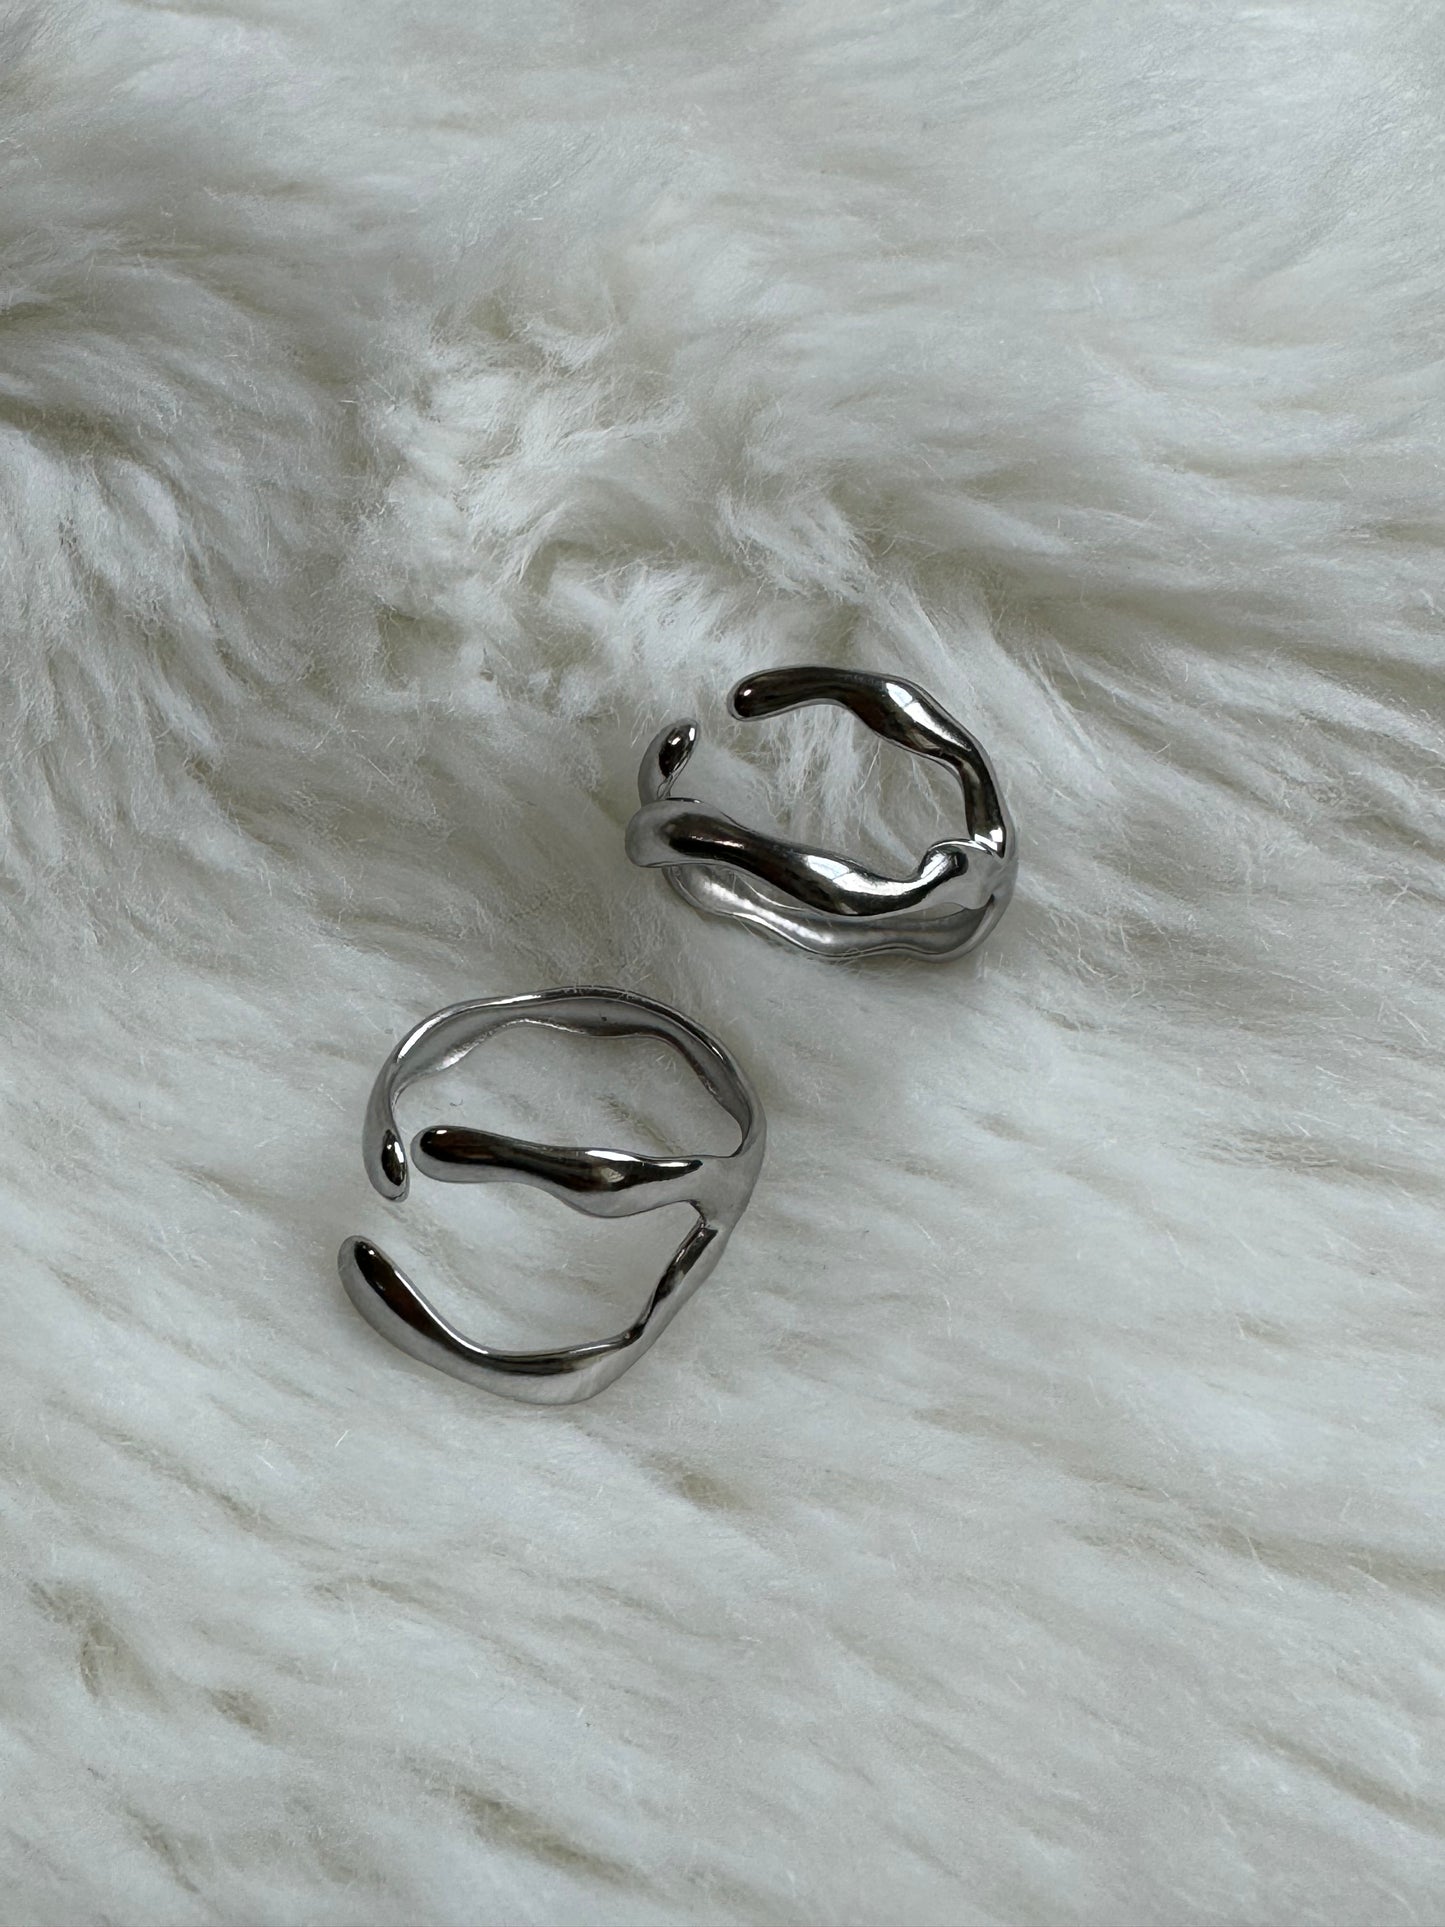 Simple Stainless Steel Ring